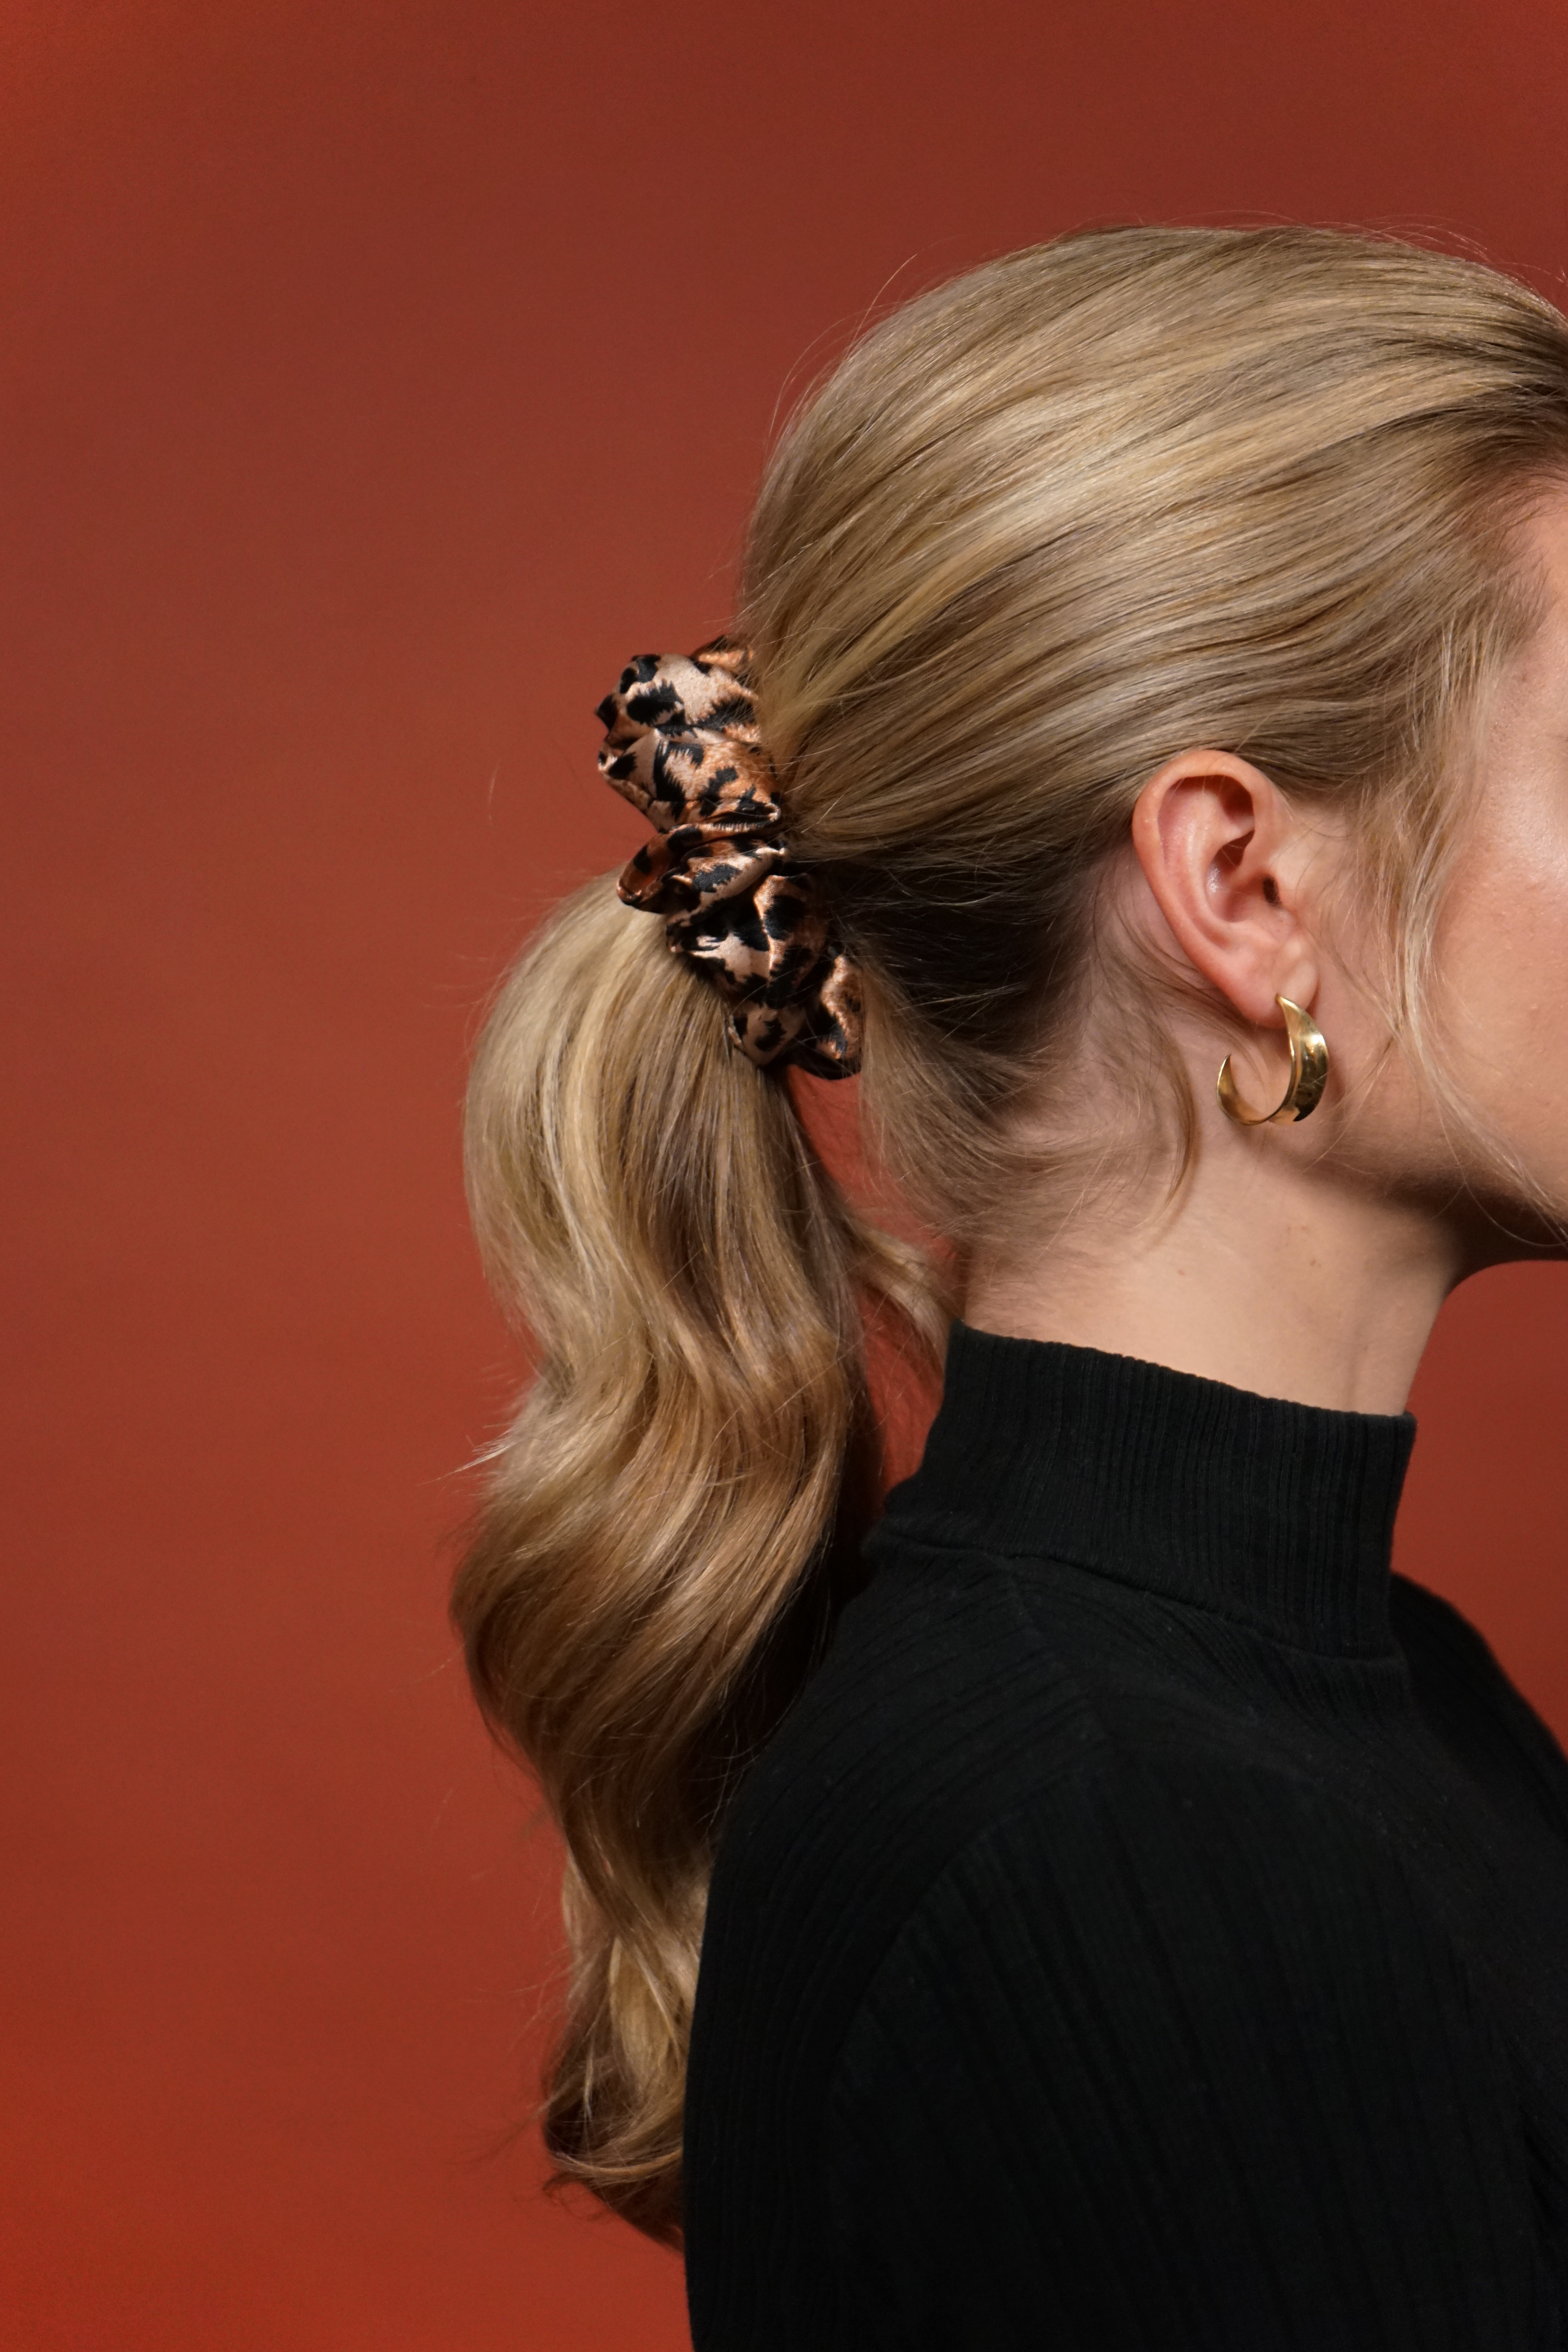 woman with long, blonde hair pulled up in a cheetah scrunchie